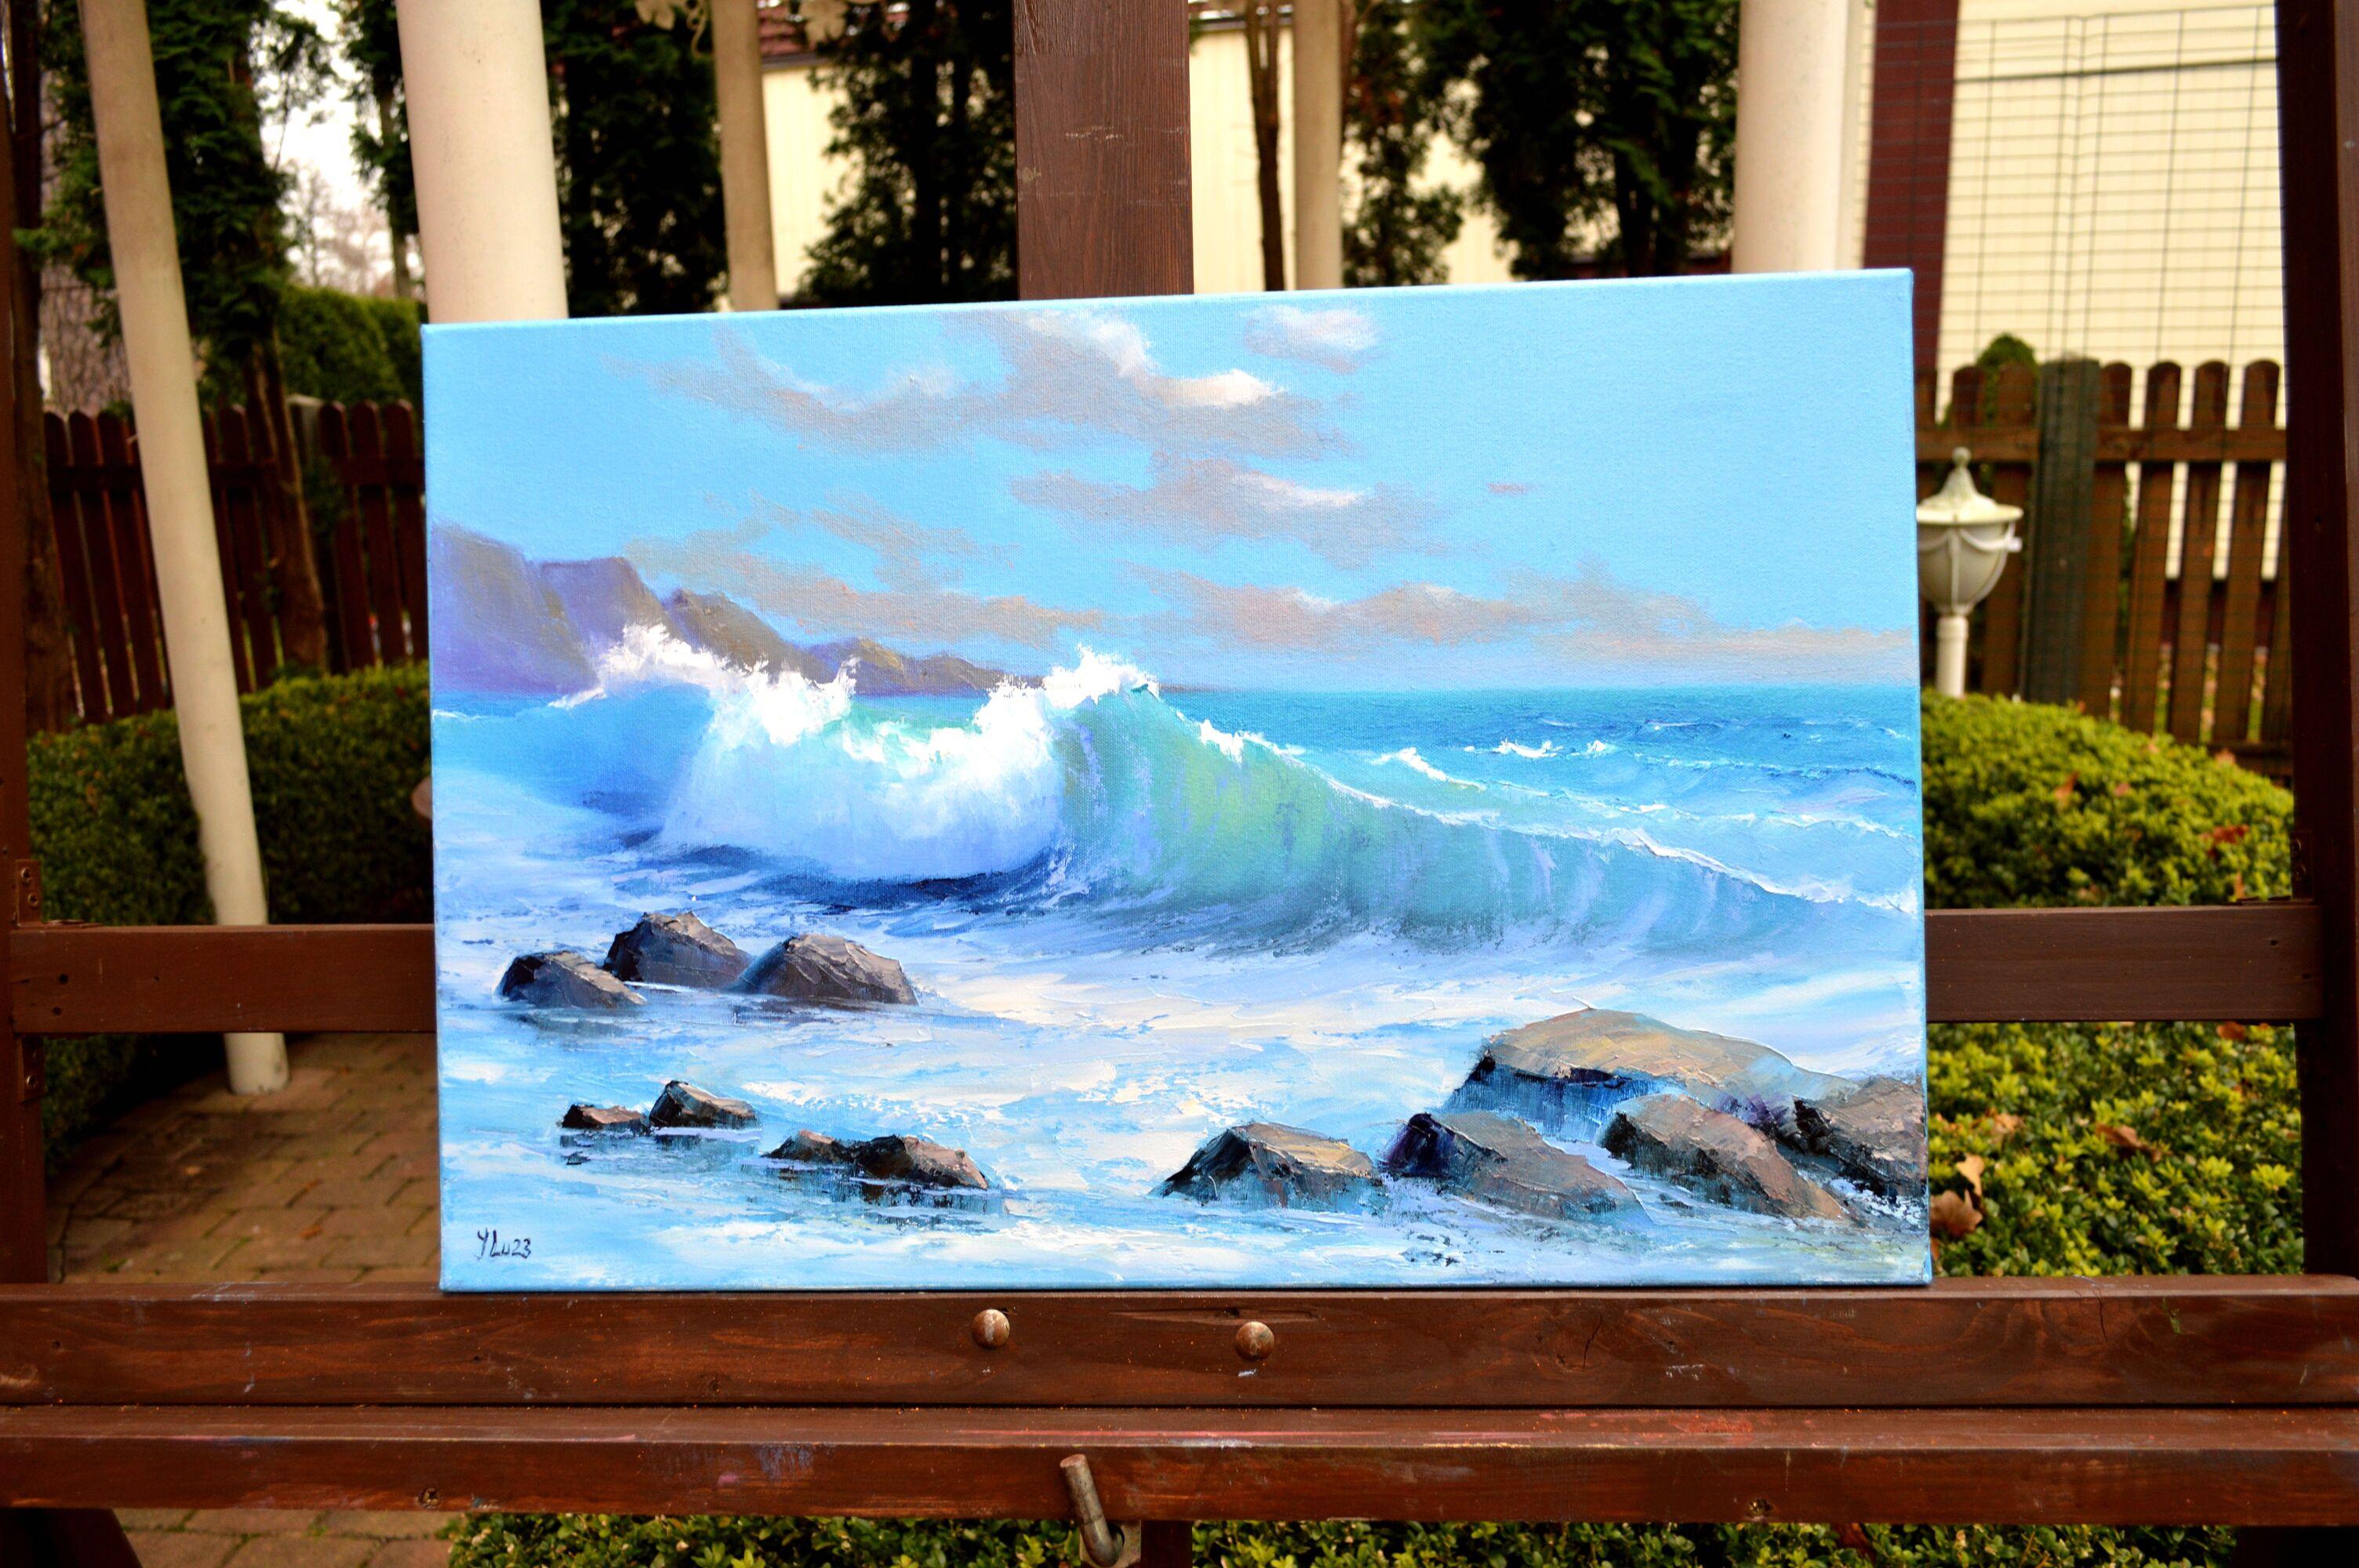 In this oil painting, I've captured the raw, spirited dance of the sea. Through energetic strokes and a rich palette, I blended realism with expressionism to evoke the ocean's majesty and its timeless rhythm. This work embodies the ocean's roar, its